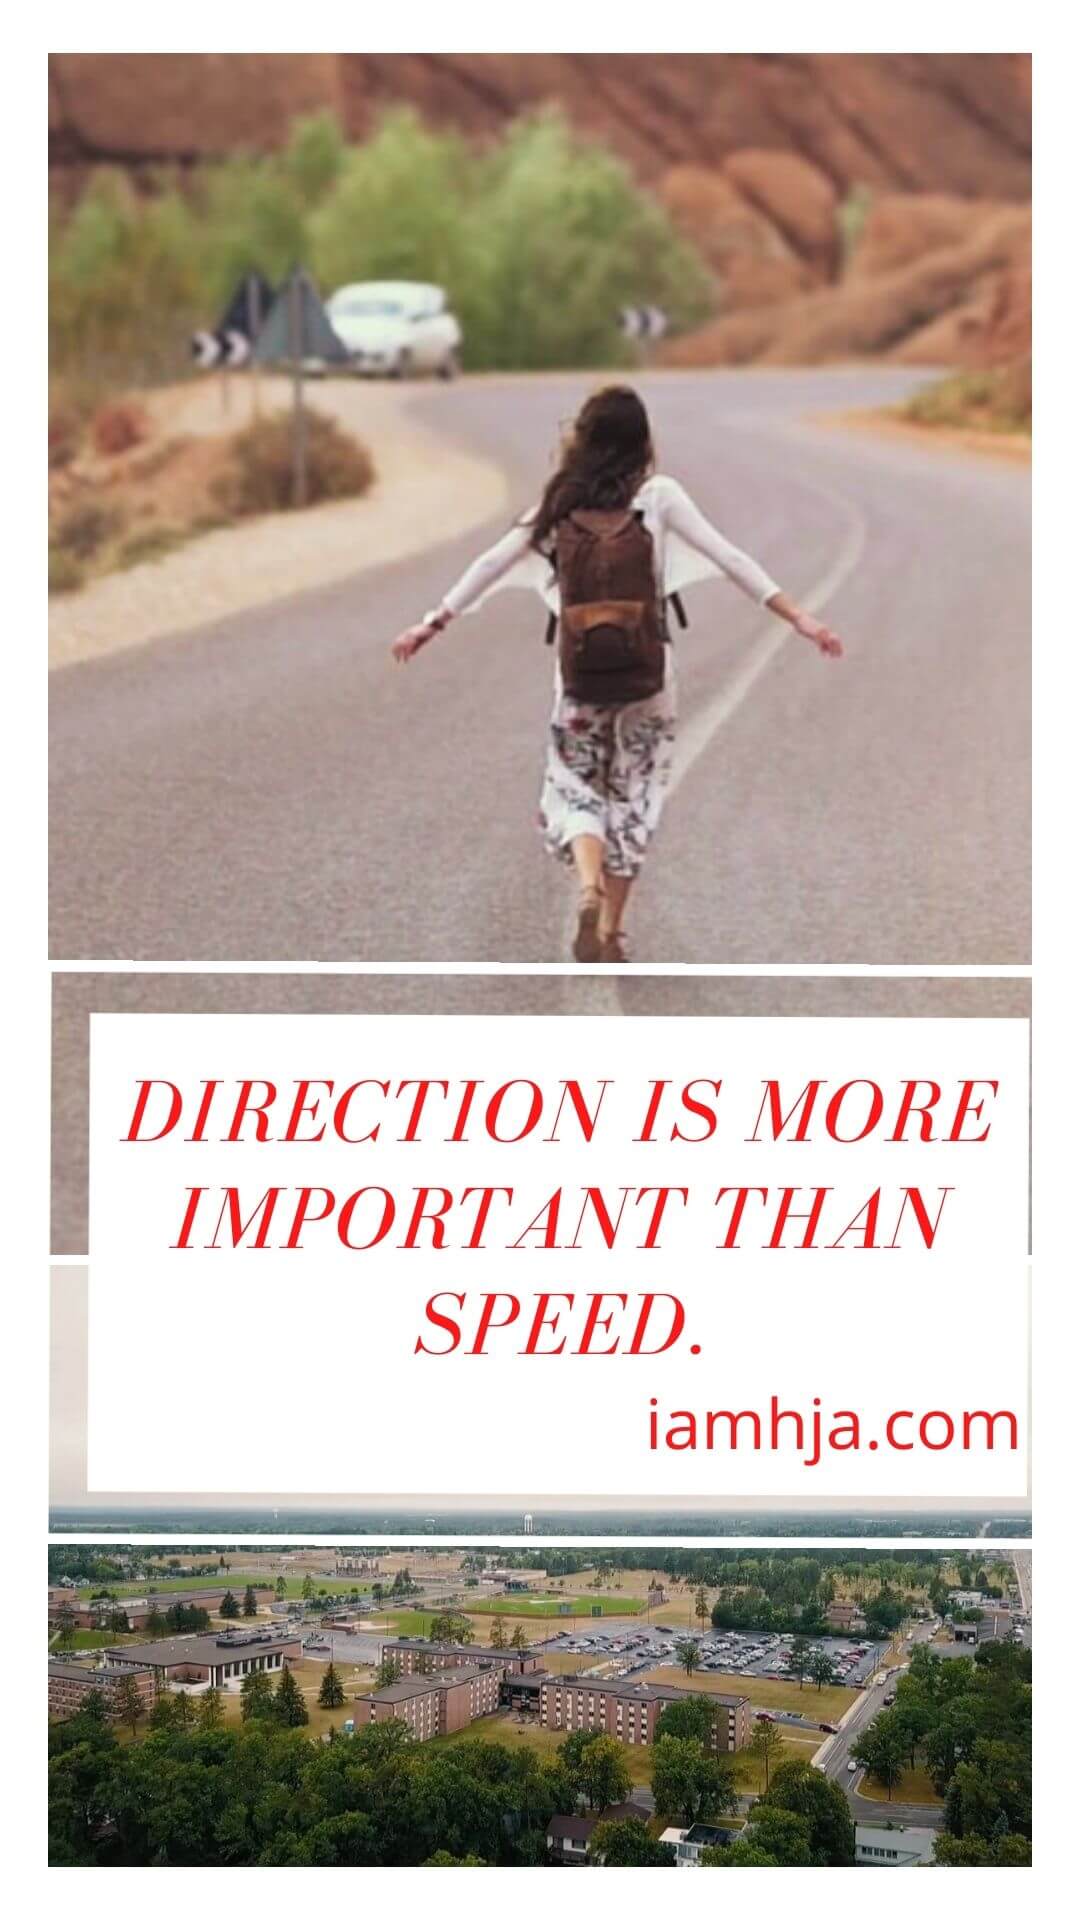 More important than speed is direction.